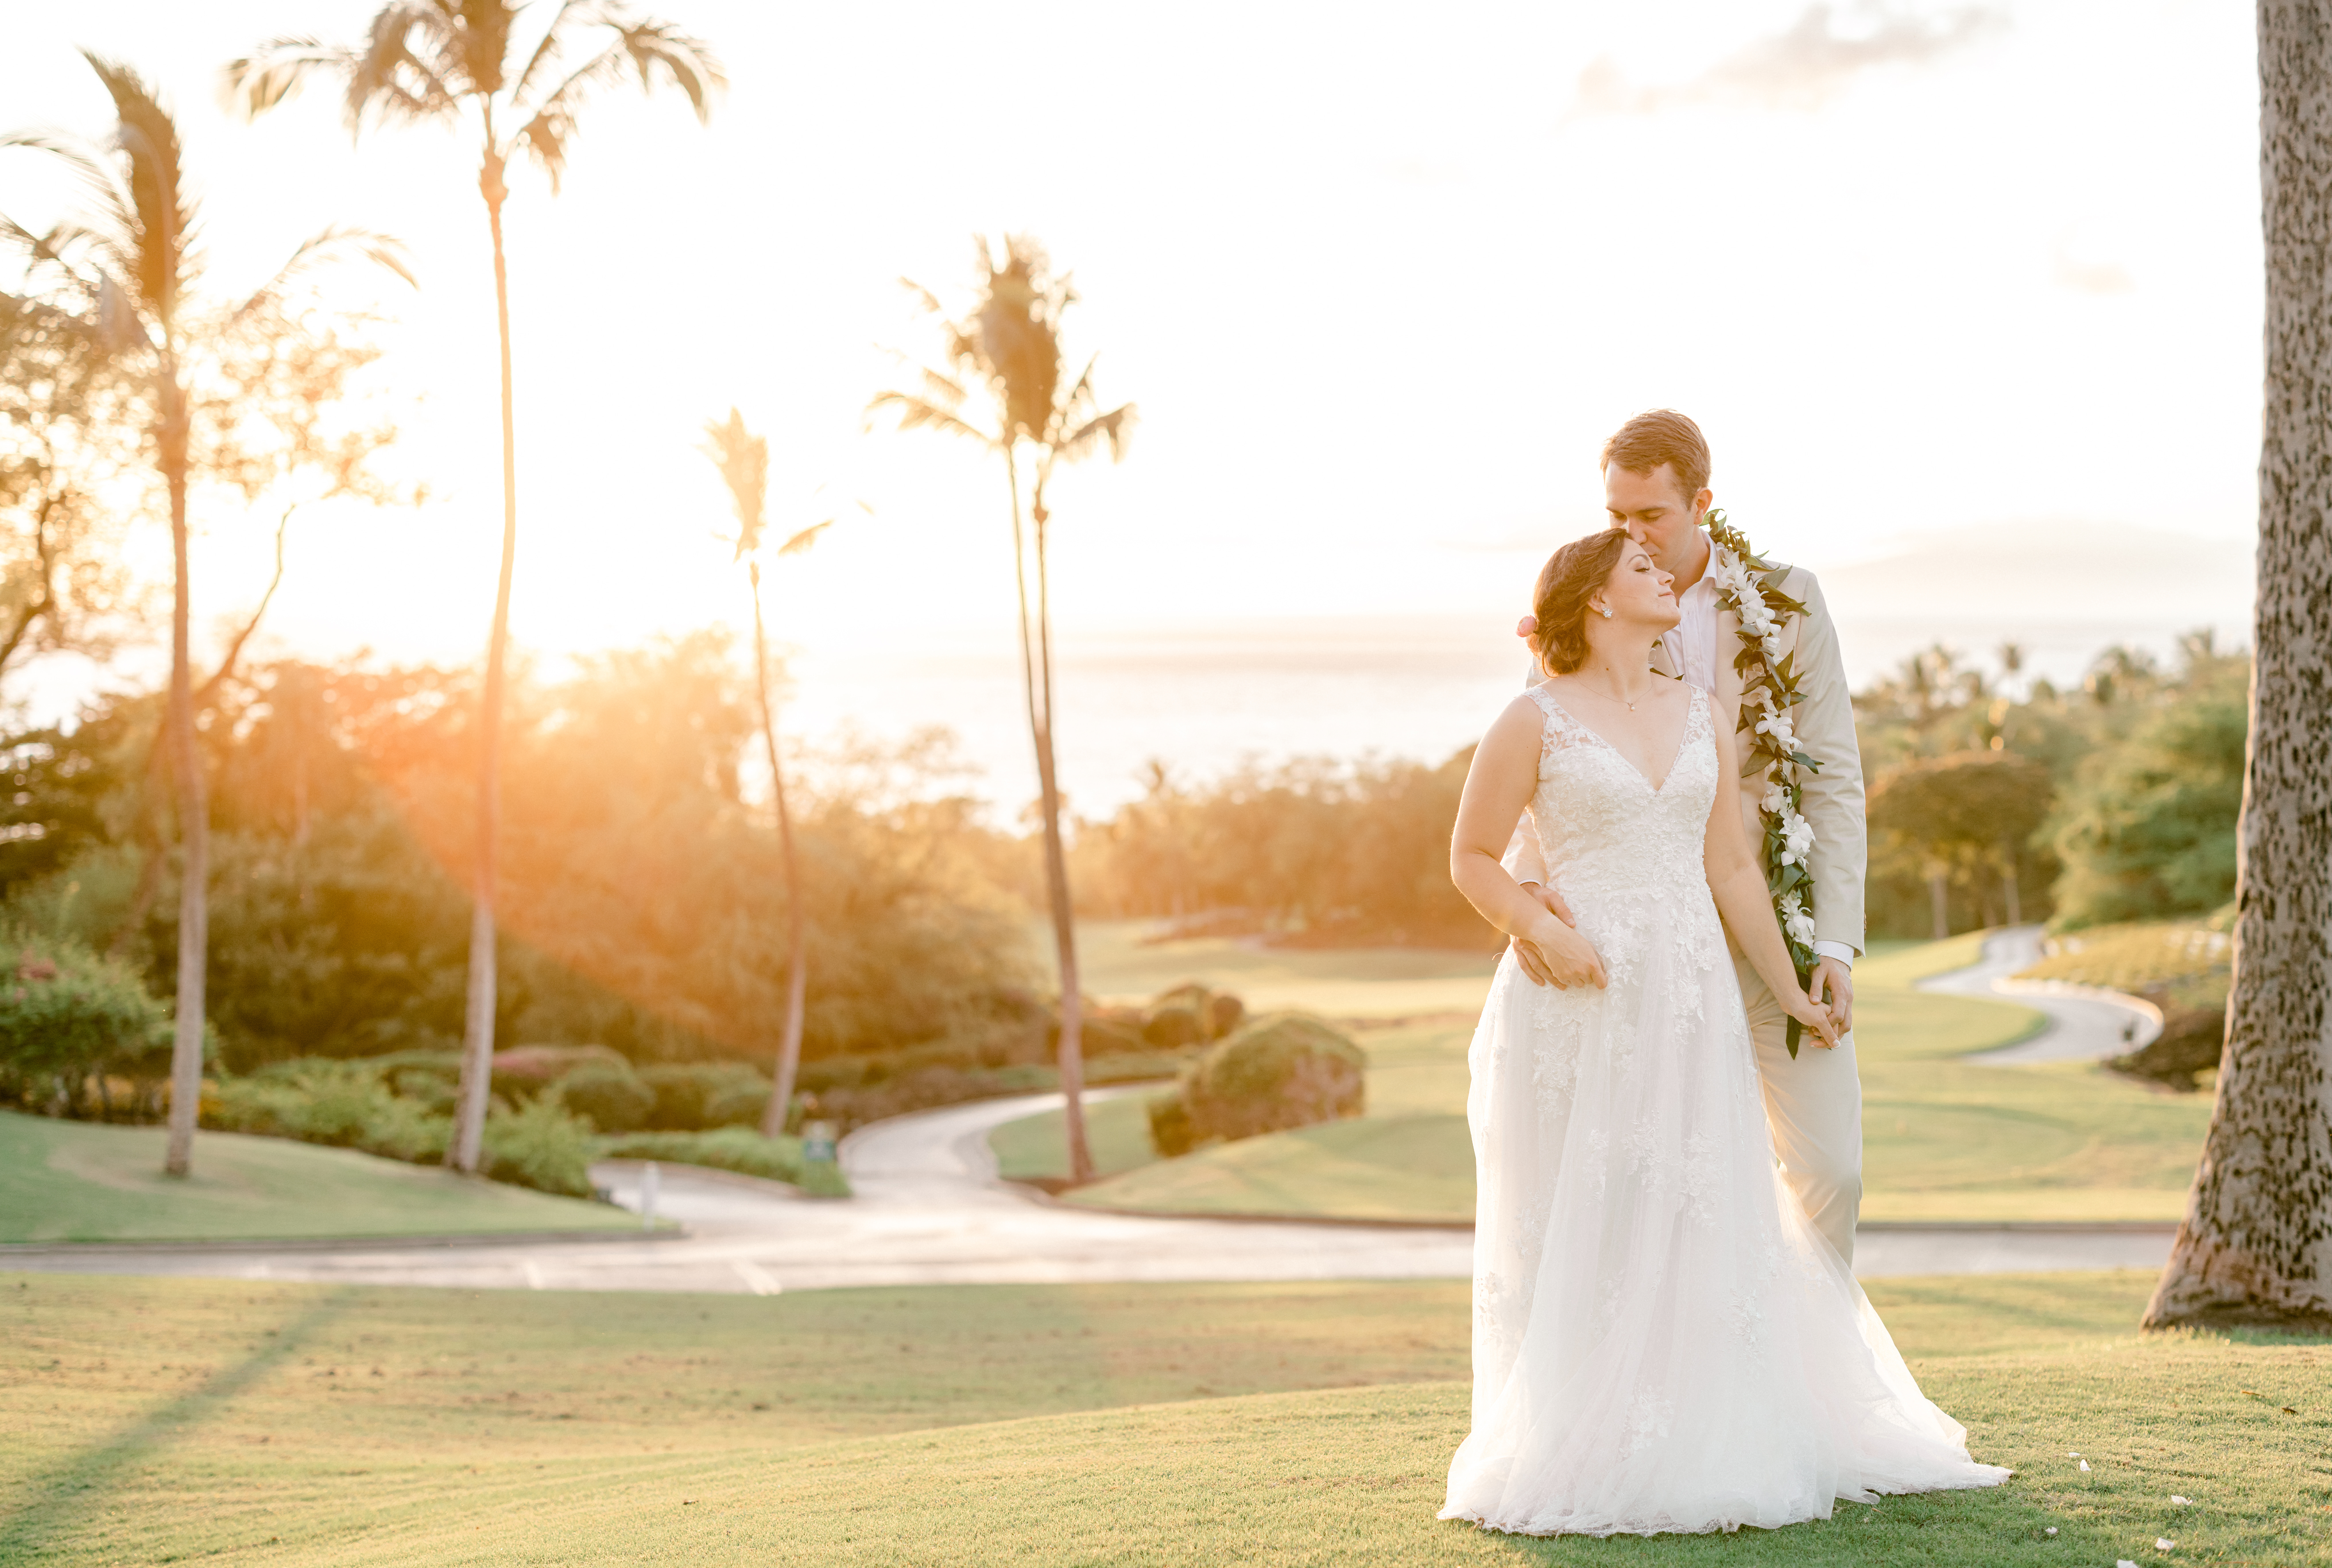 Newlyweds standing together during a Maui sunset at Gannon's restaurant